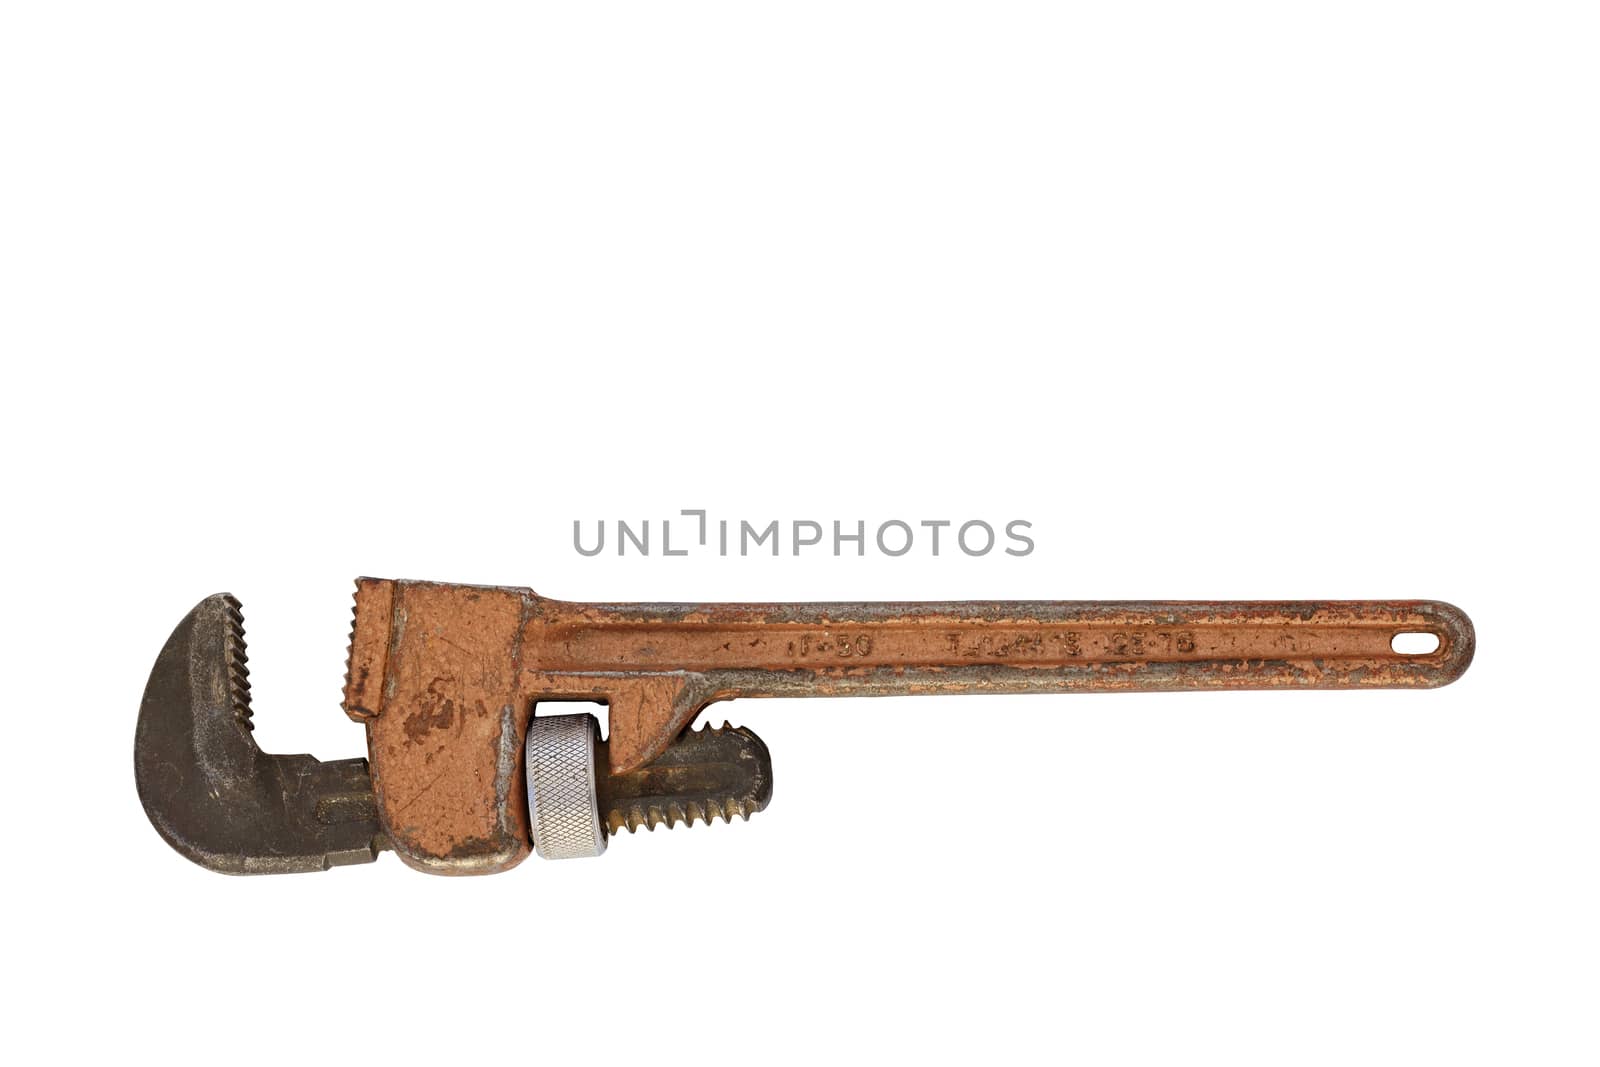 Old metal adjustable pipe wrench horizontal and isolated on white background.